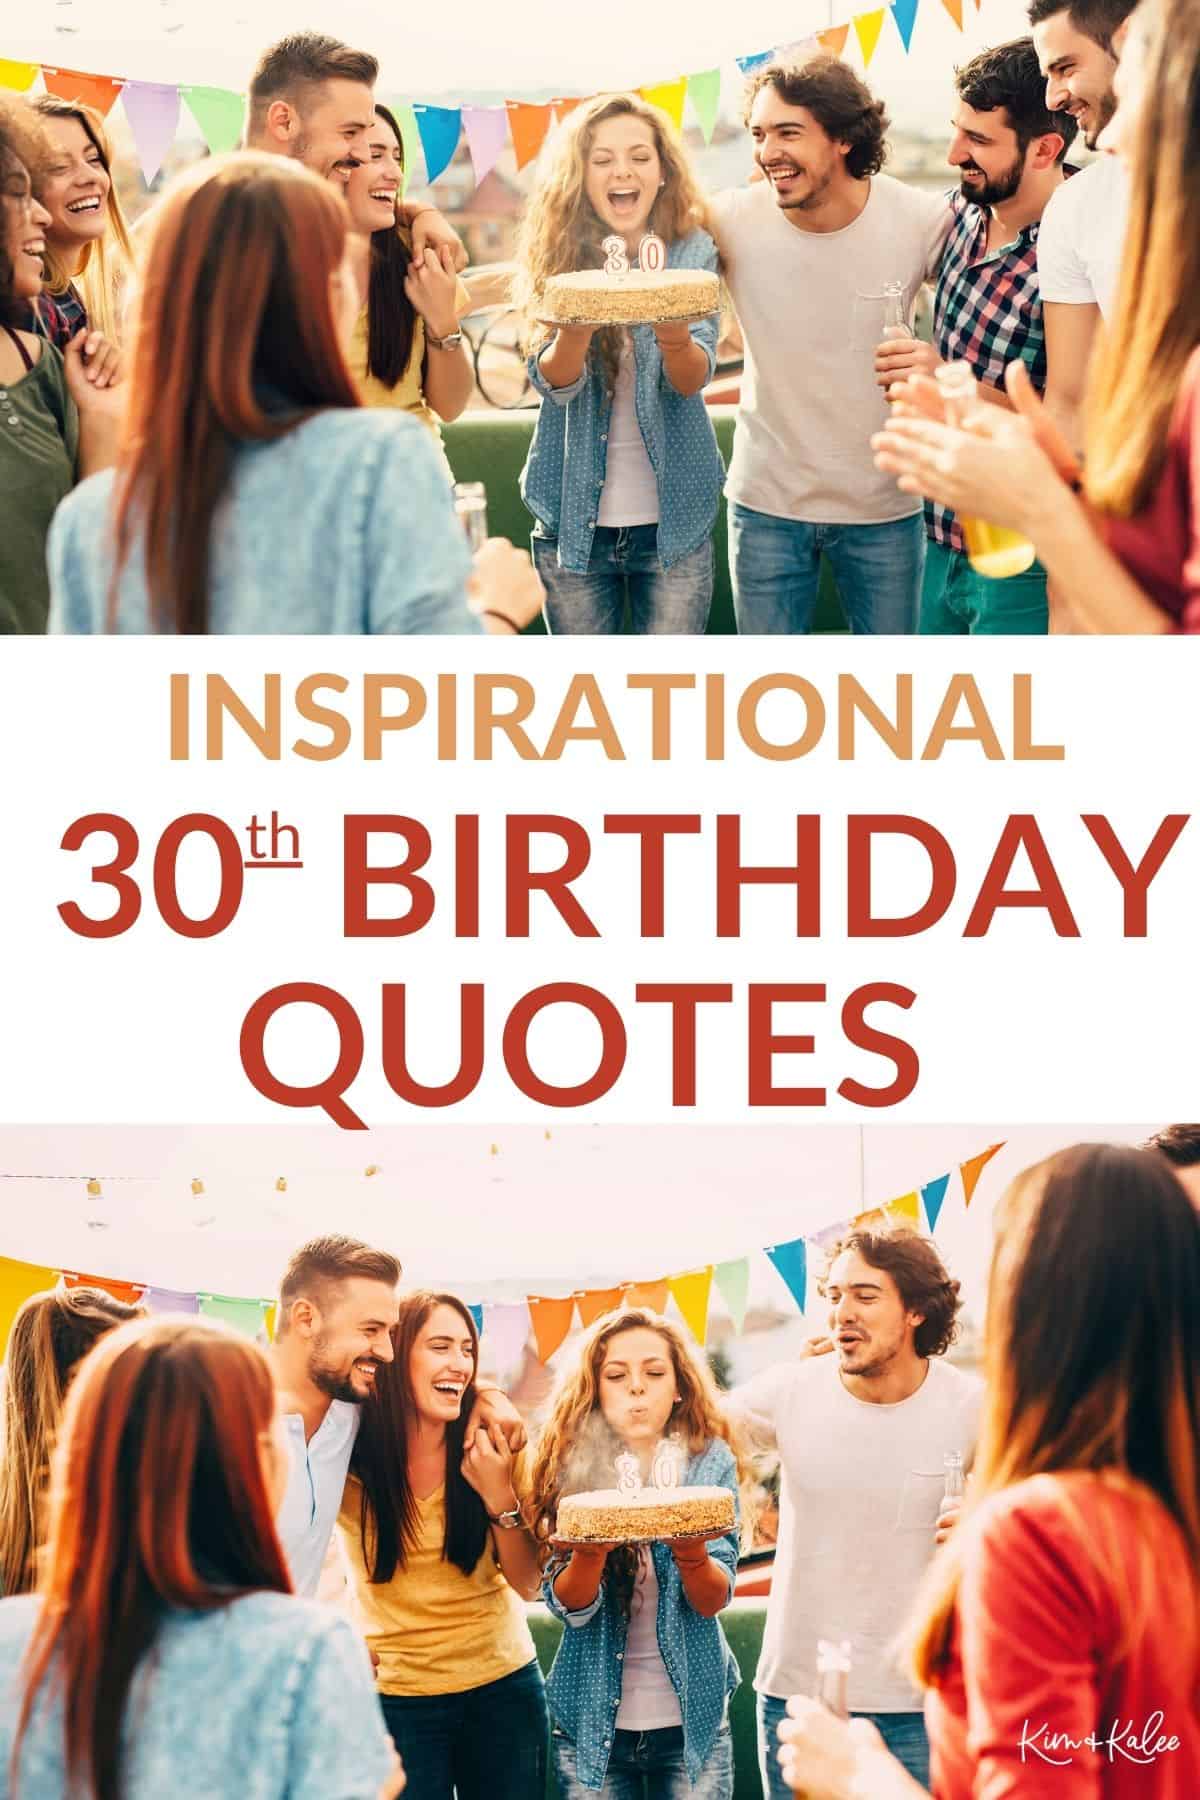 friends celebrating a woman's 30th birthday - collage photo - text overlay says Inspirational 30th Birthday Quotes